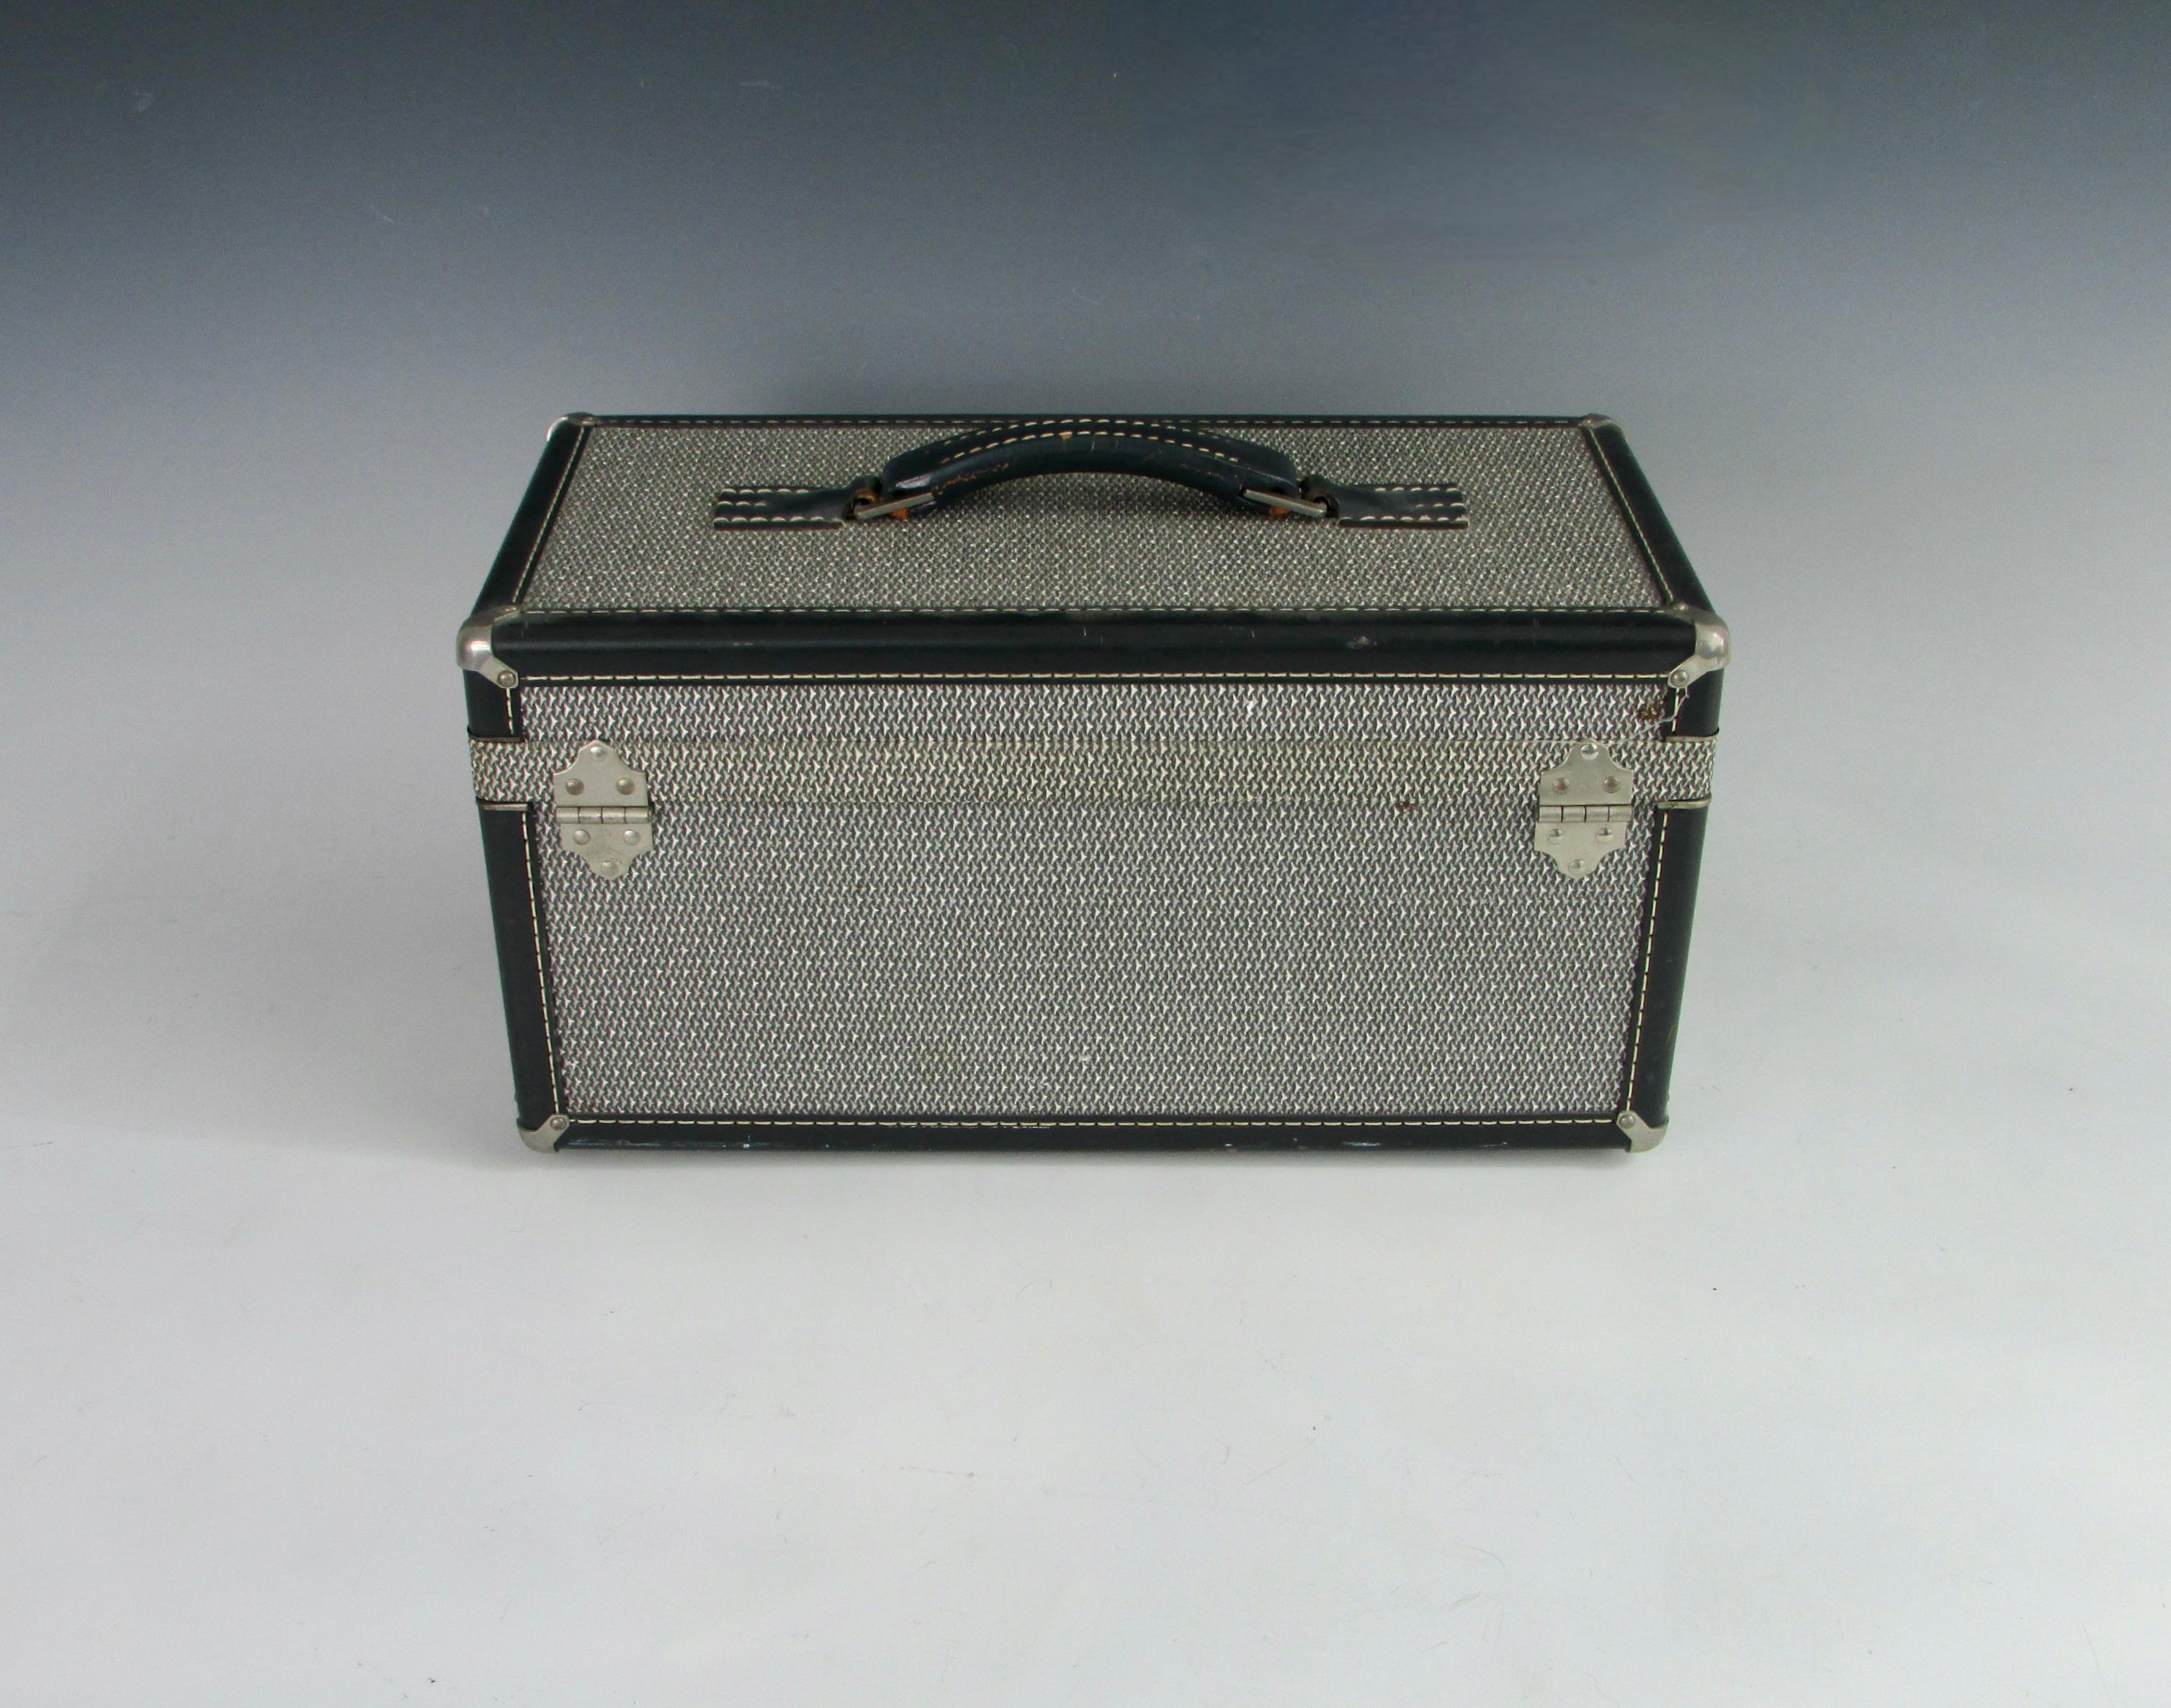 Partially made famous by Ian Fleming by describing James Bond as carrying a Hartman Skymate suitcase in live and let die ca. 1954 . 
Trimmed in leather with nickel plated hardware Hartman is some of the finest luggage available . This mini case can